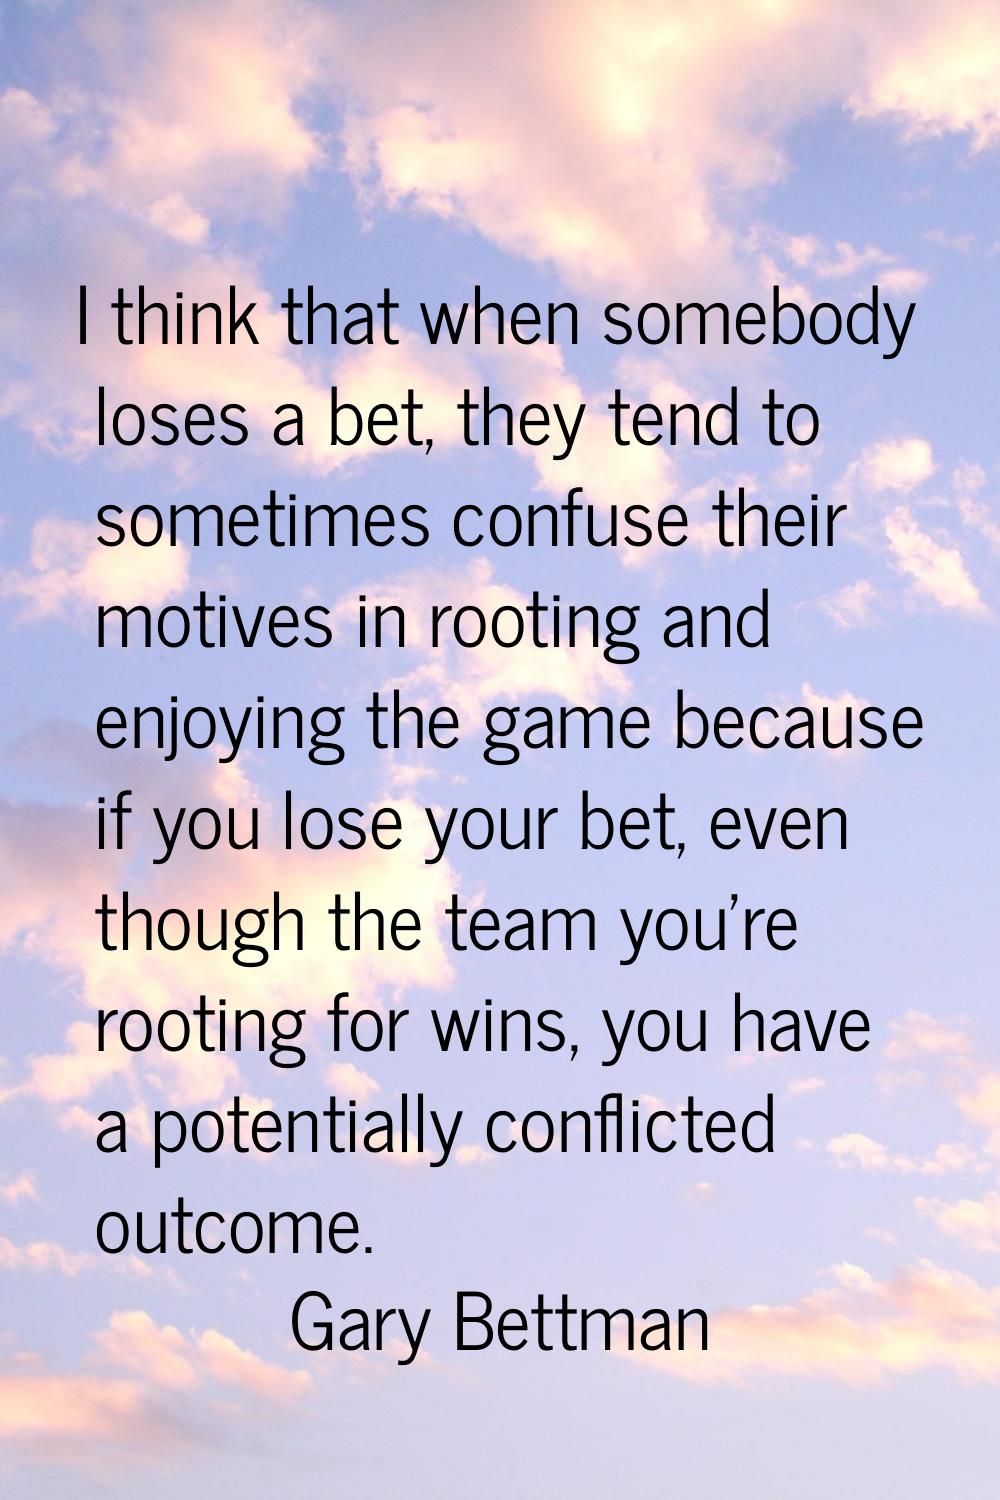 I think that when somebody loses a bet, they tend to sometimes confuse their motives in rooting and